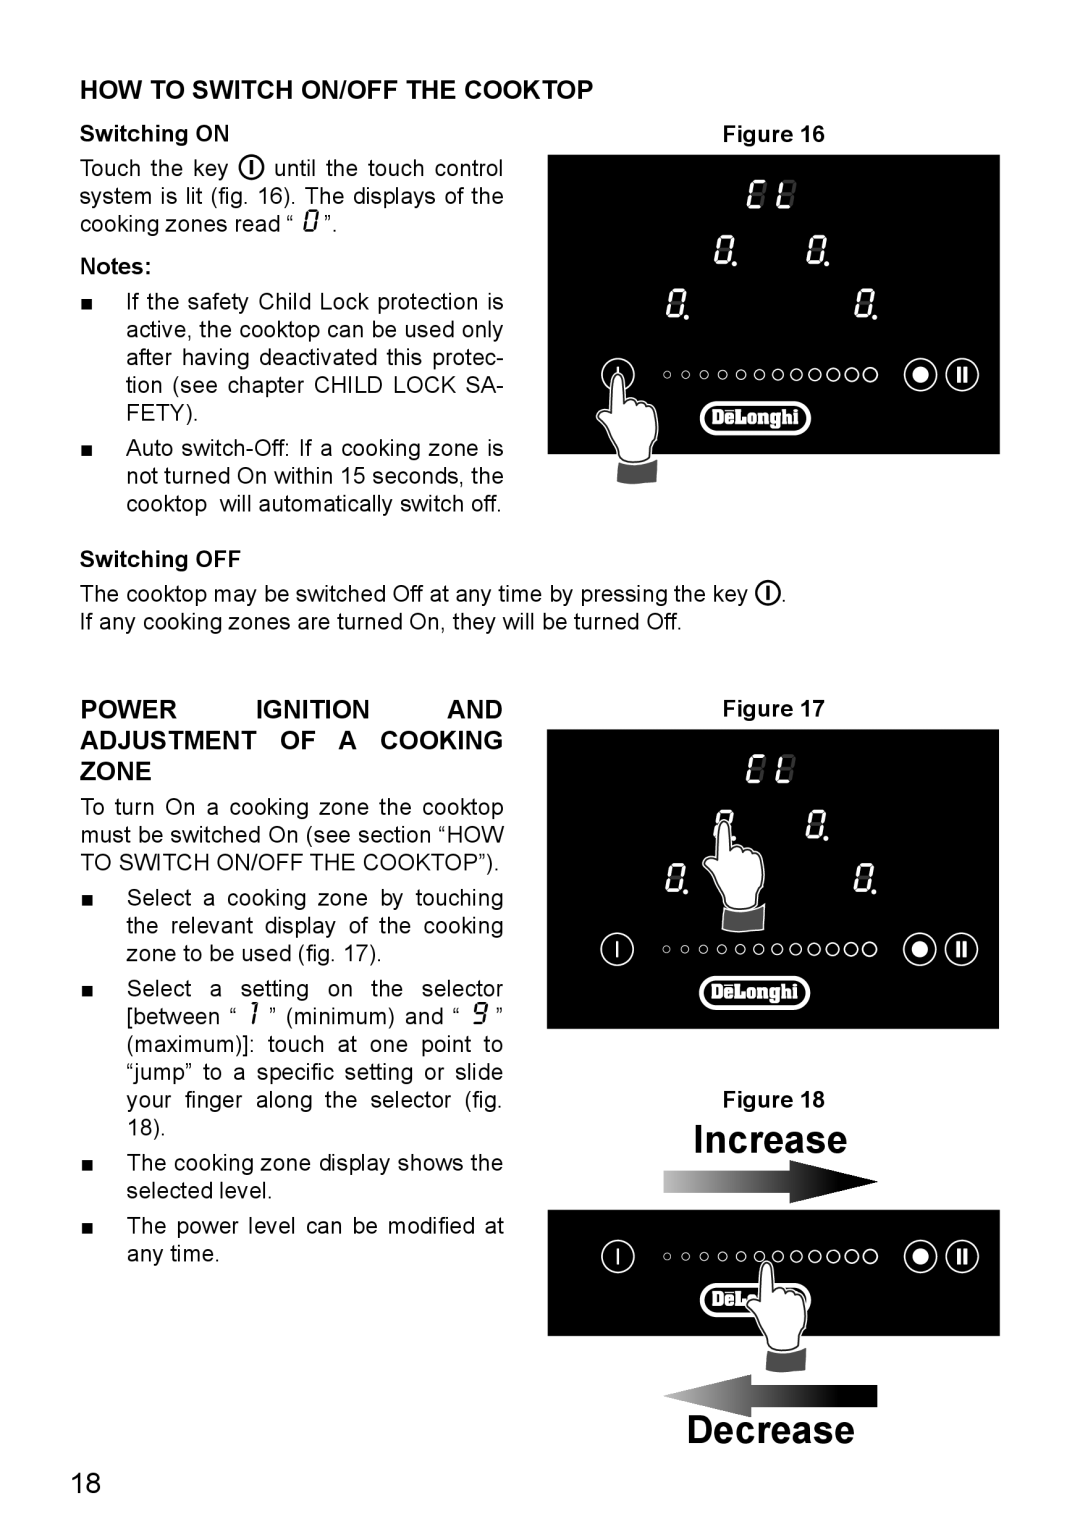 DeLonghi DEIND603 Increase, Decrease, How To Switch On/Off The Cooktop, Power Ignition And Adjustment Of A Cooking Zone 